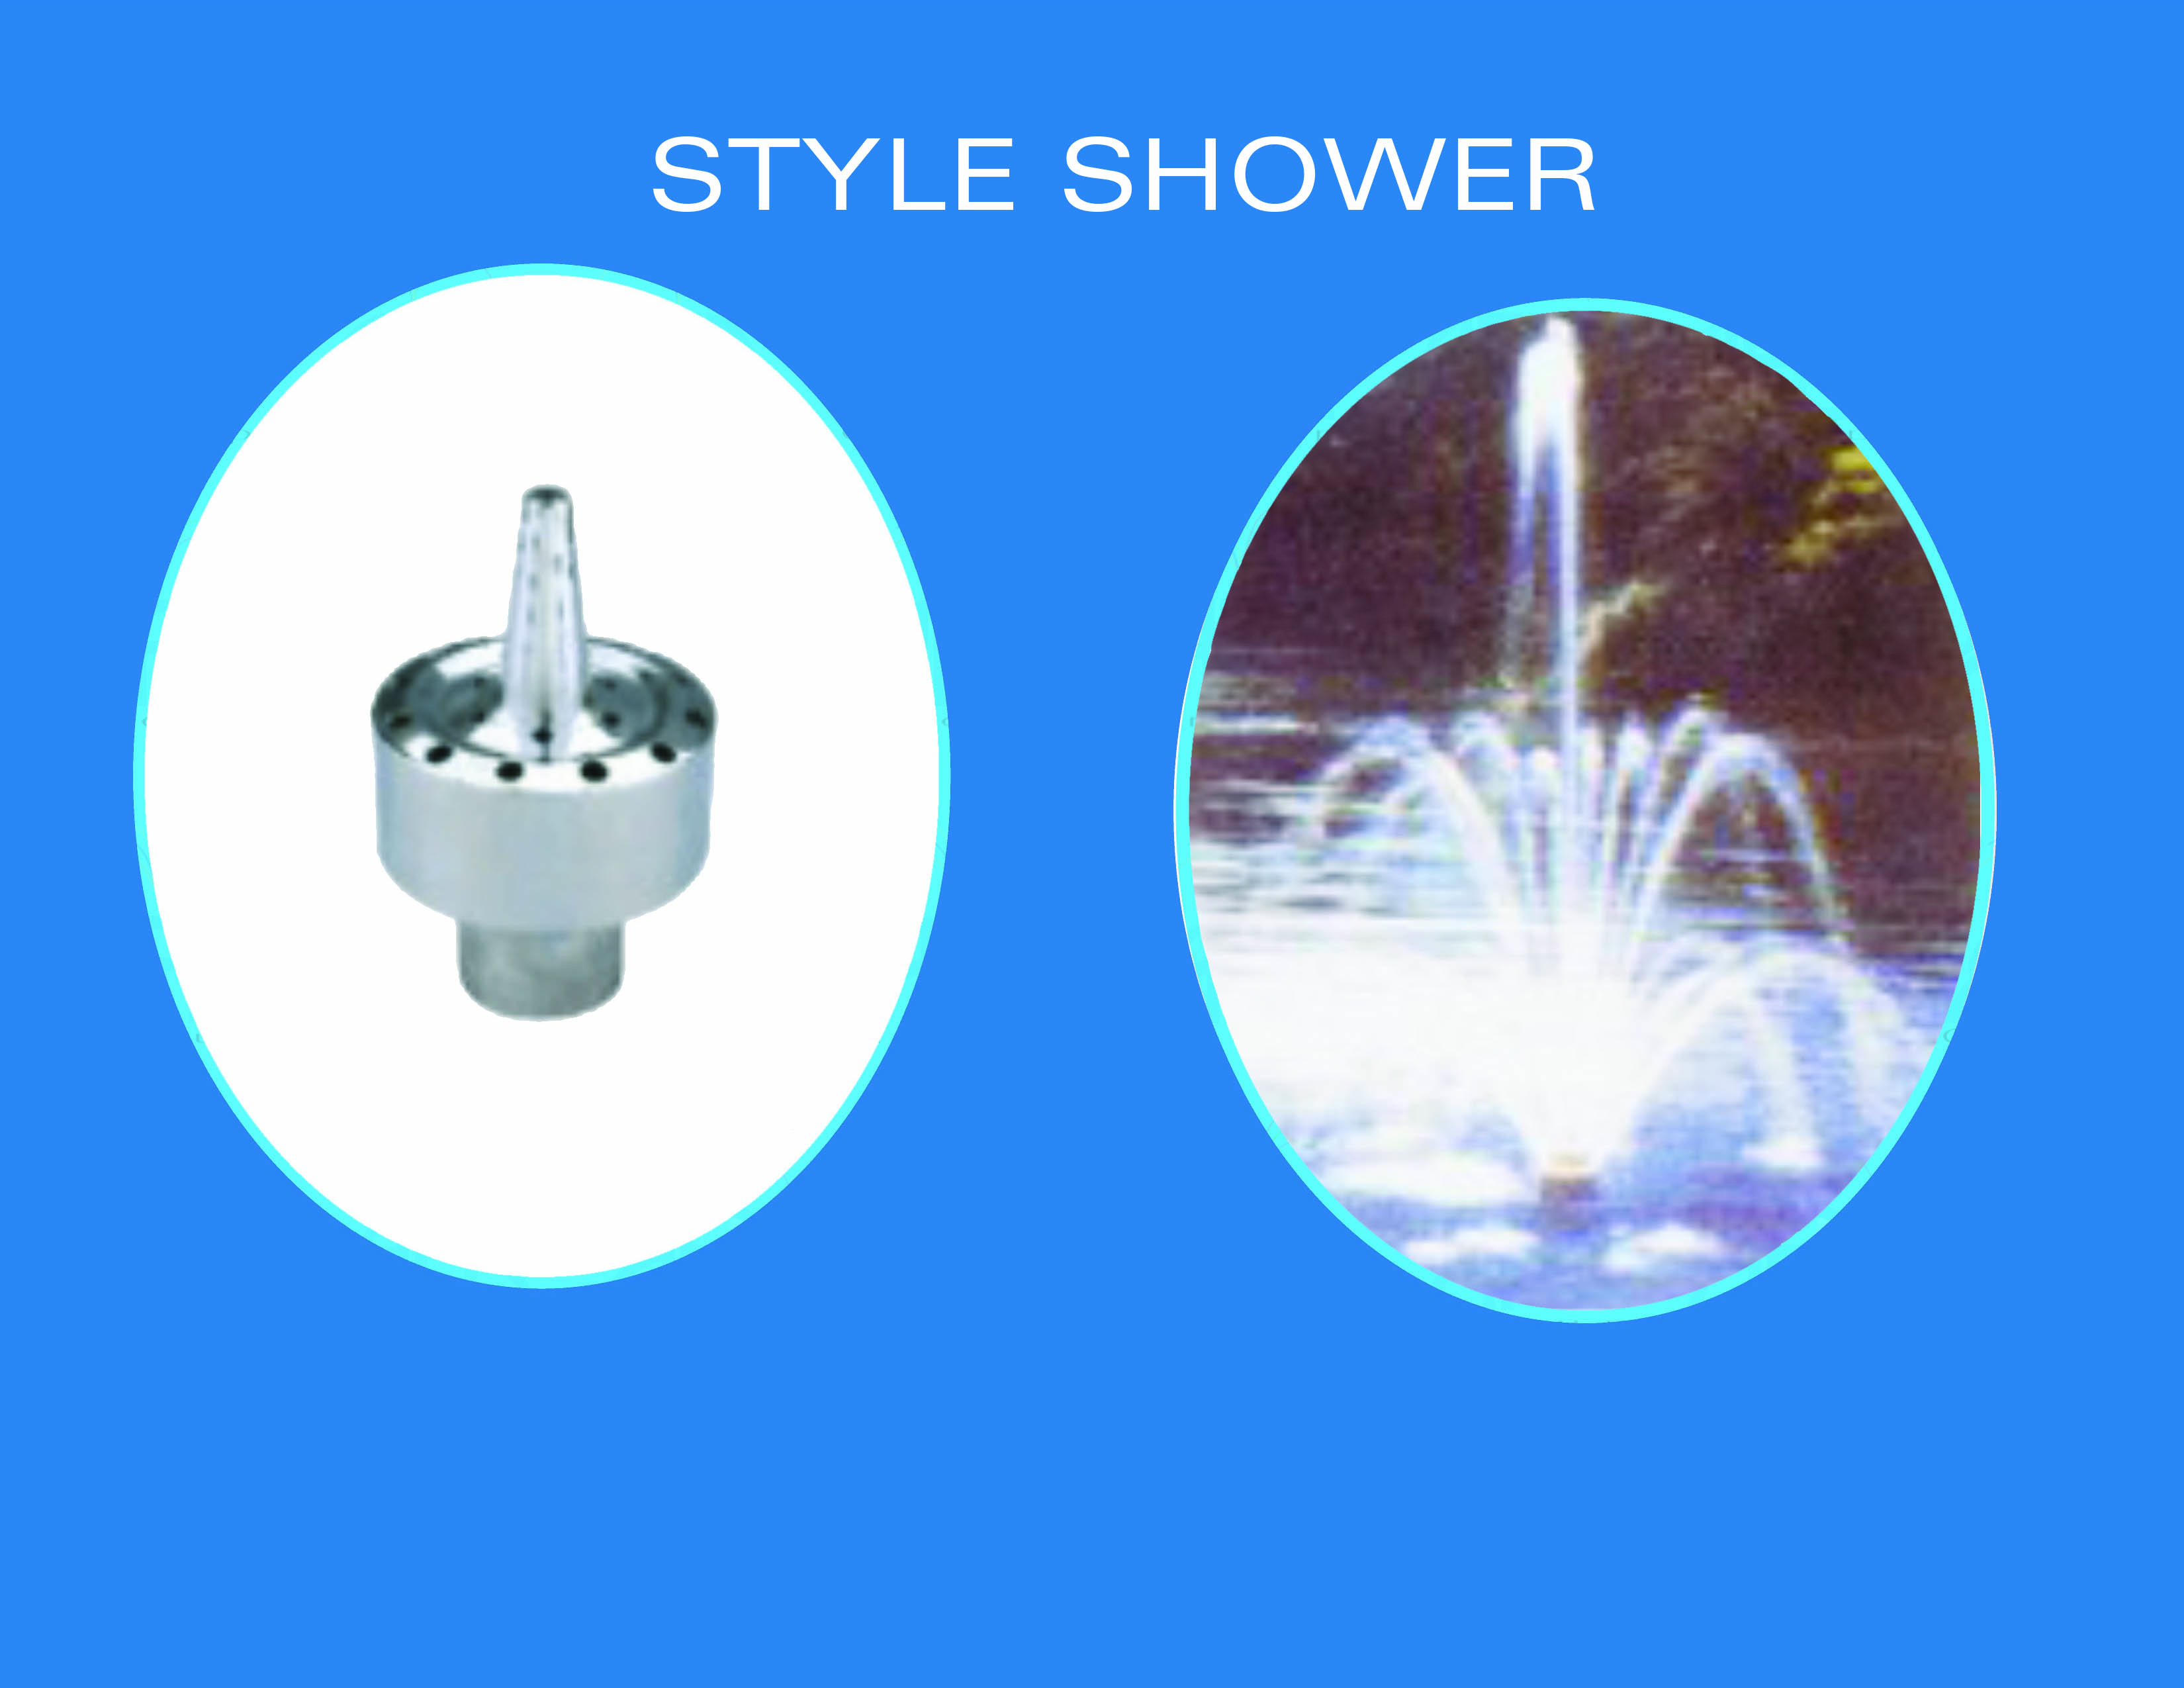 Style shower